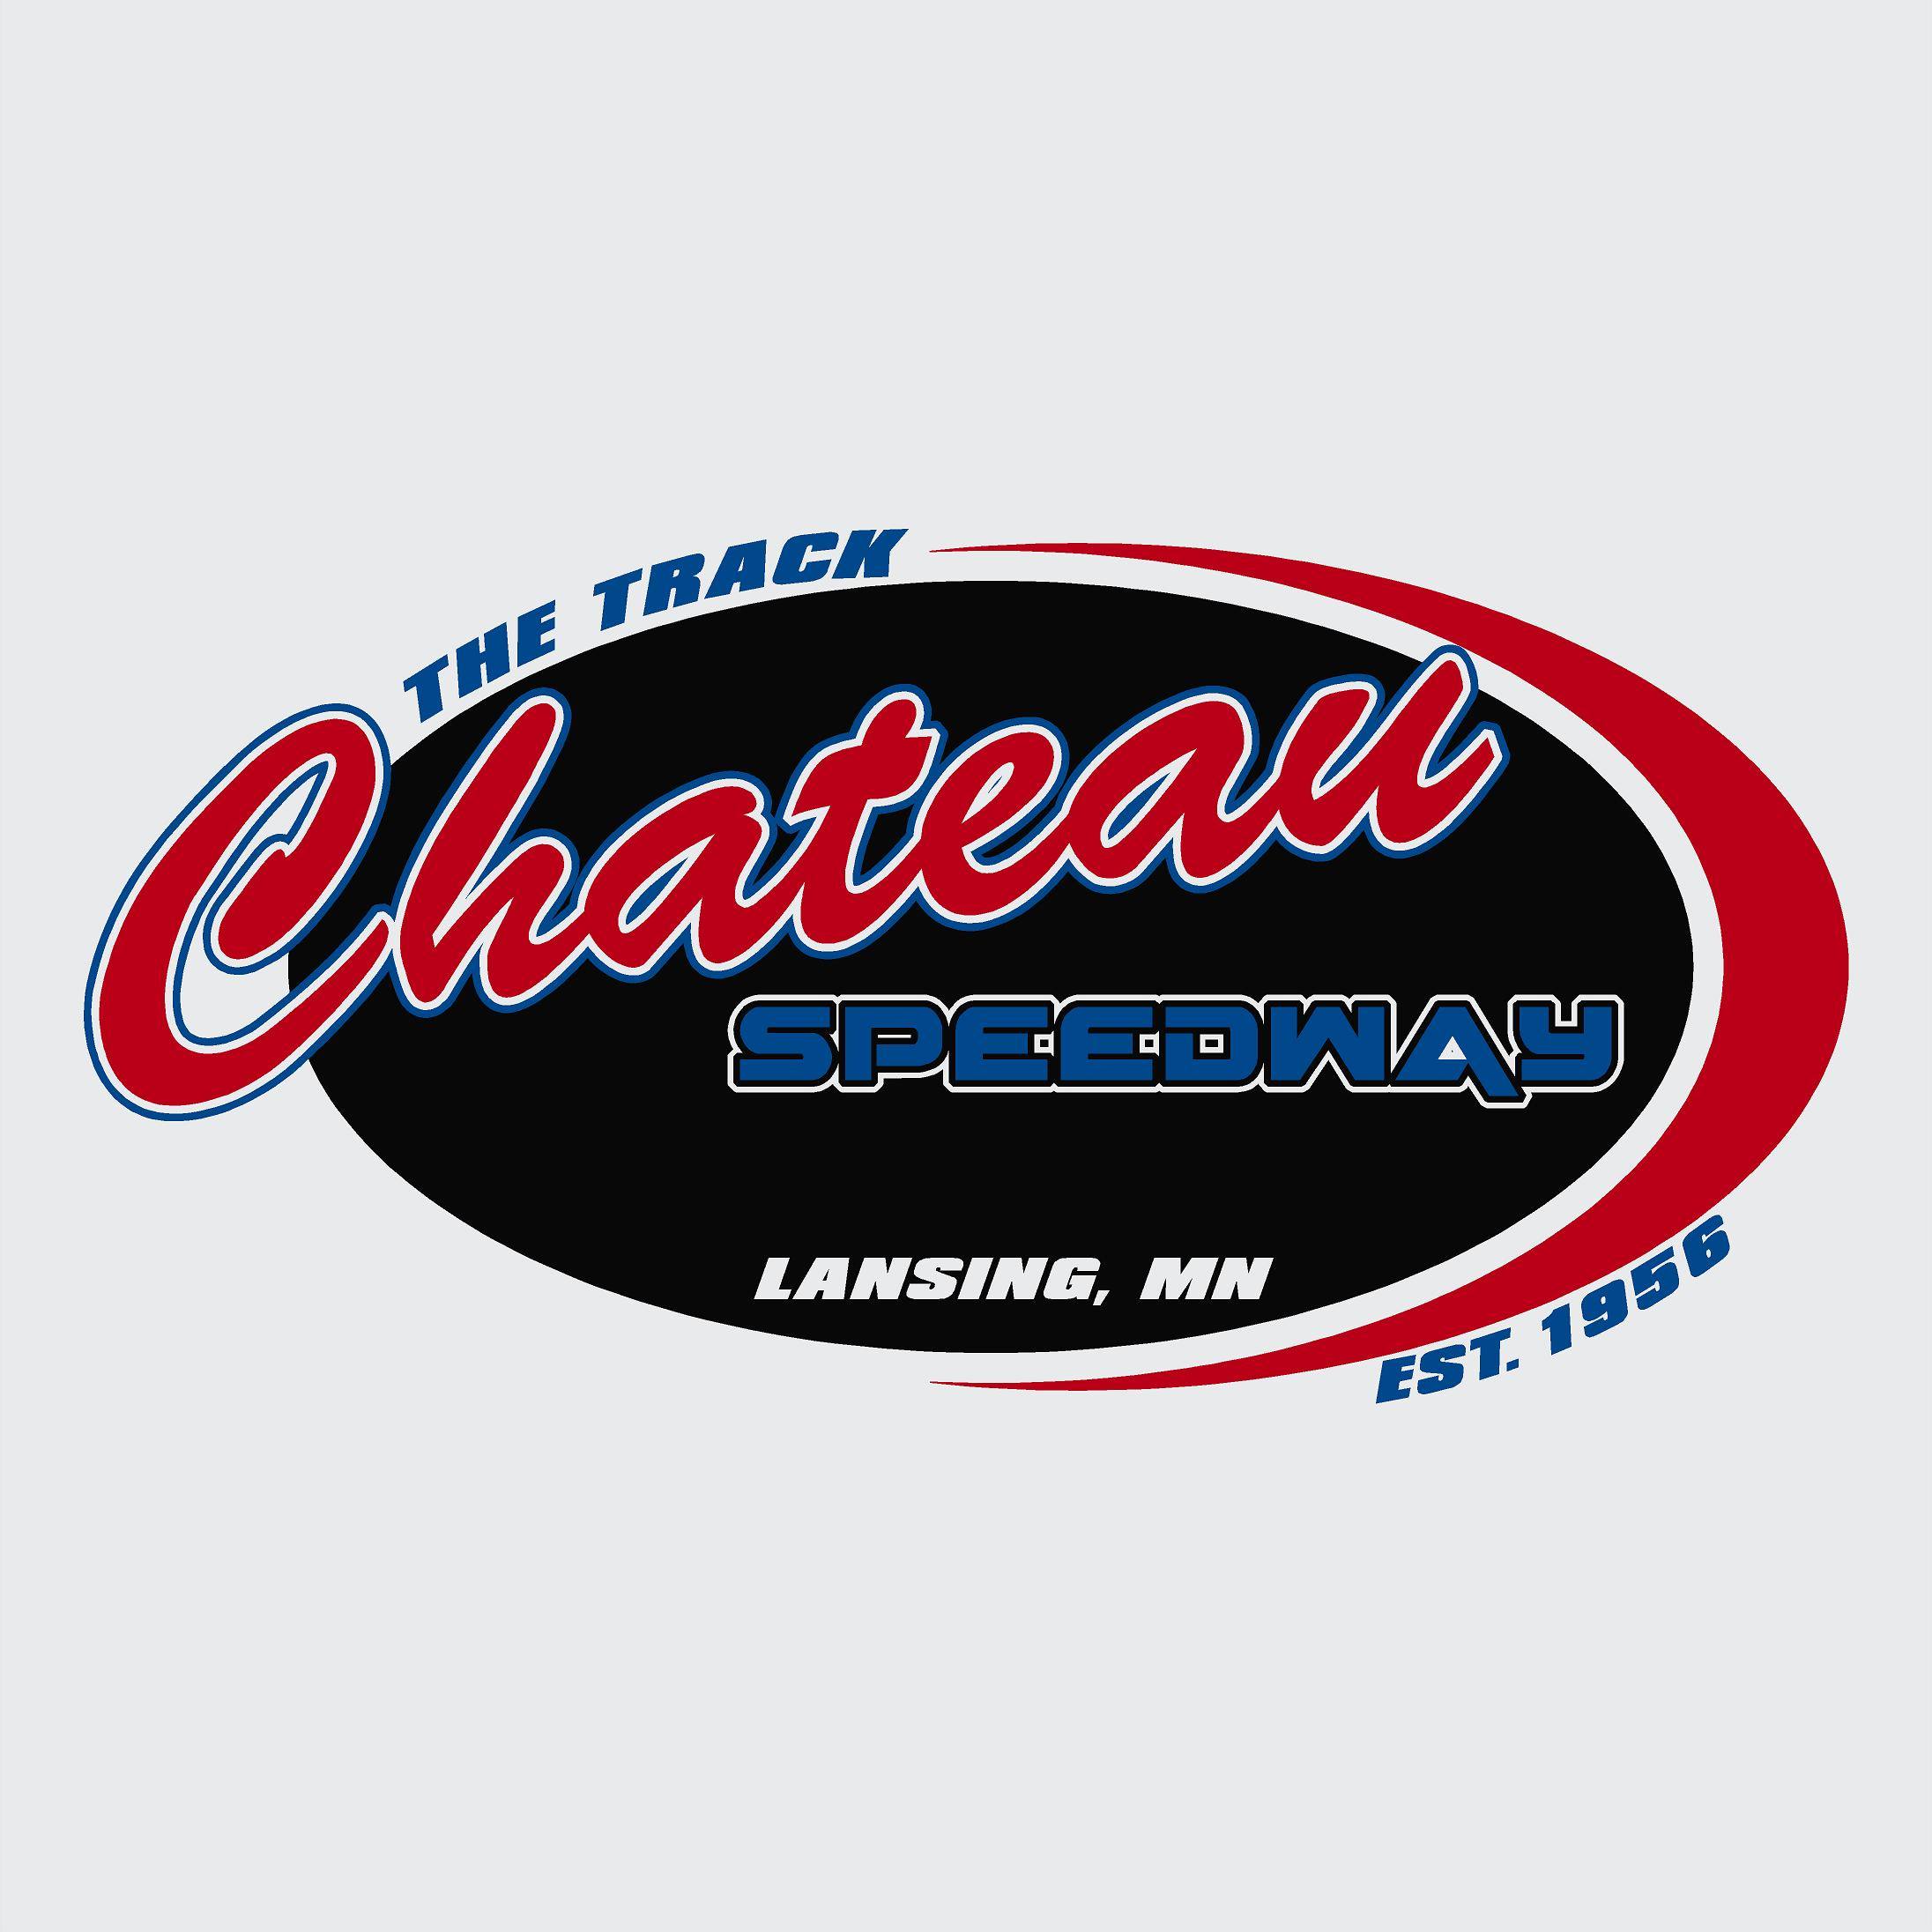 Chateau Speedway